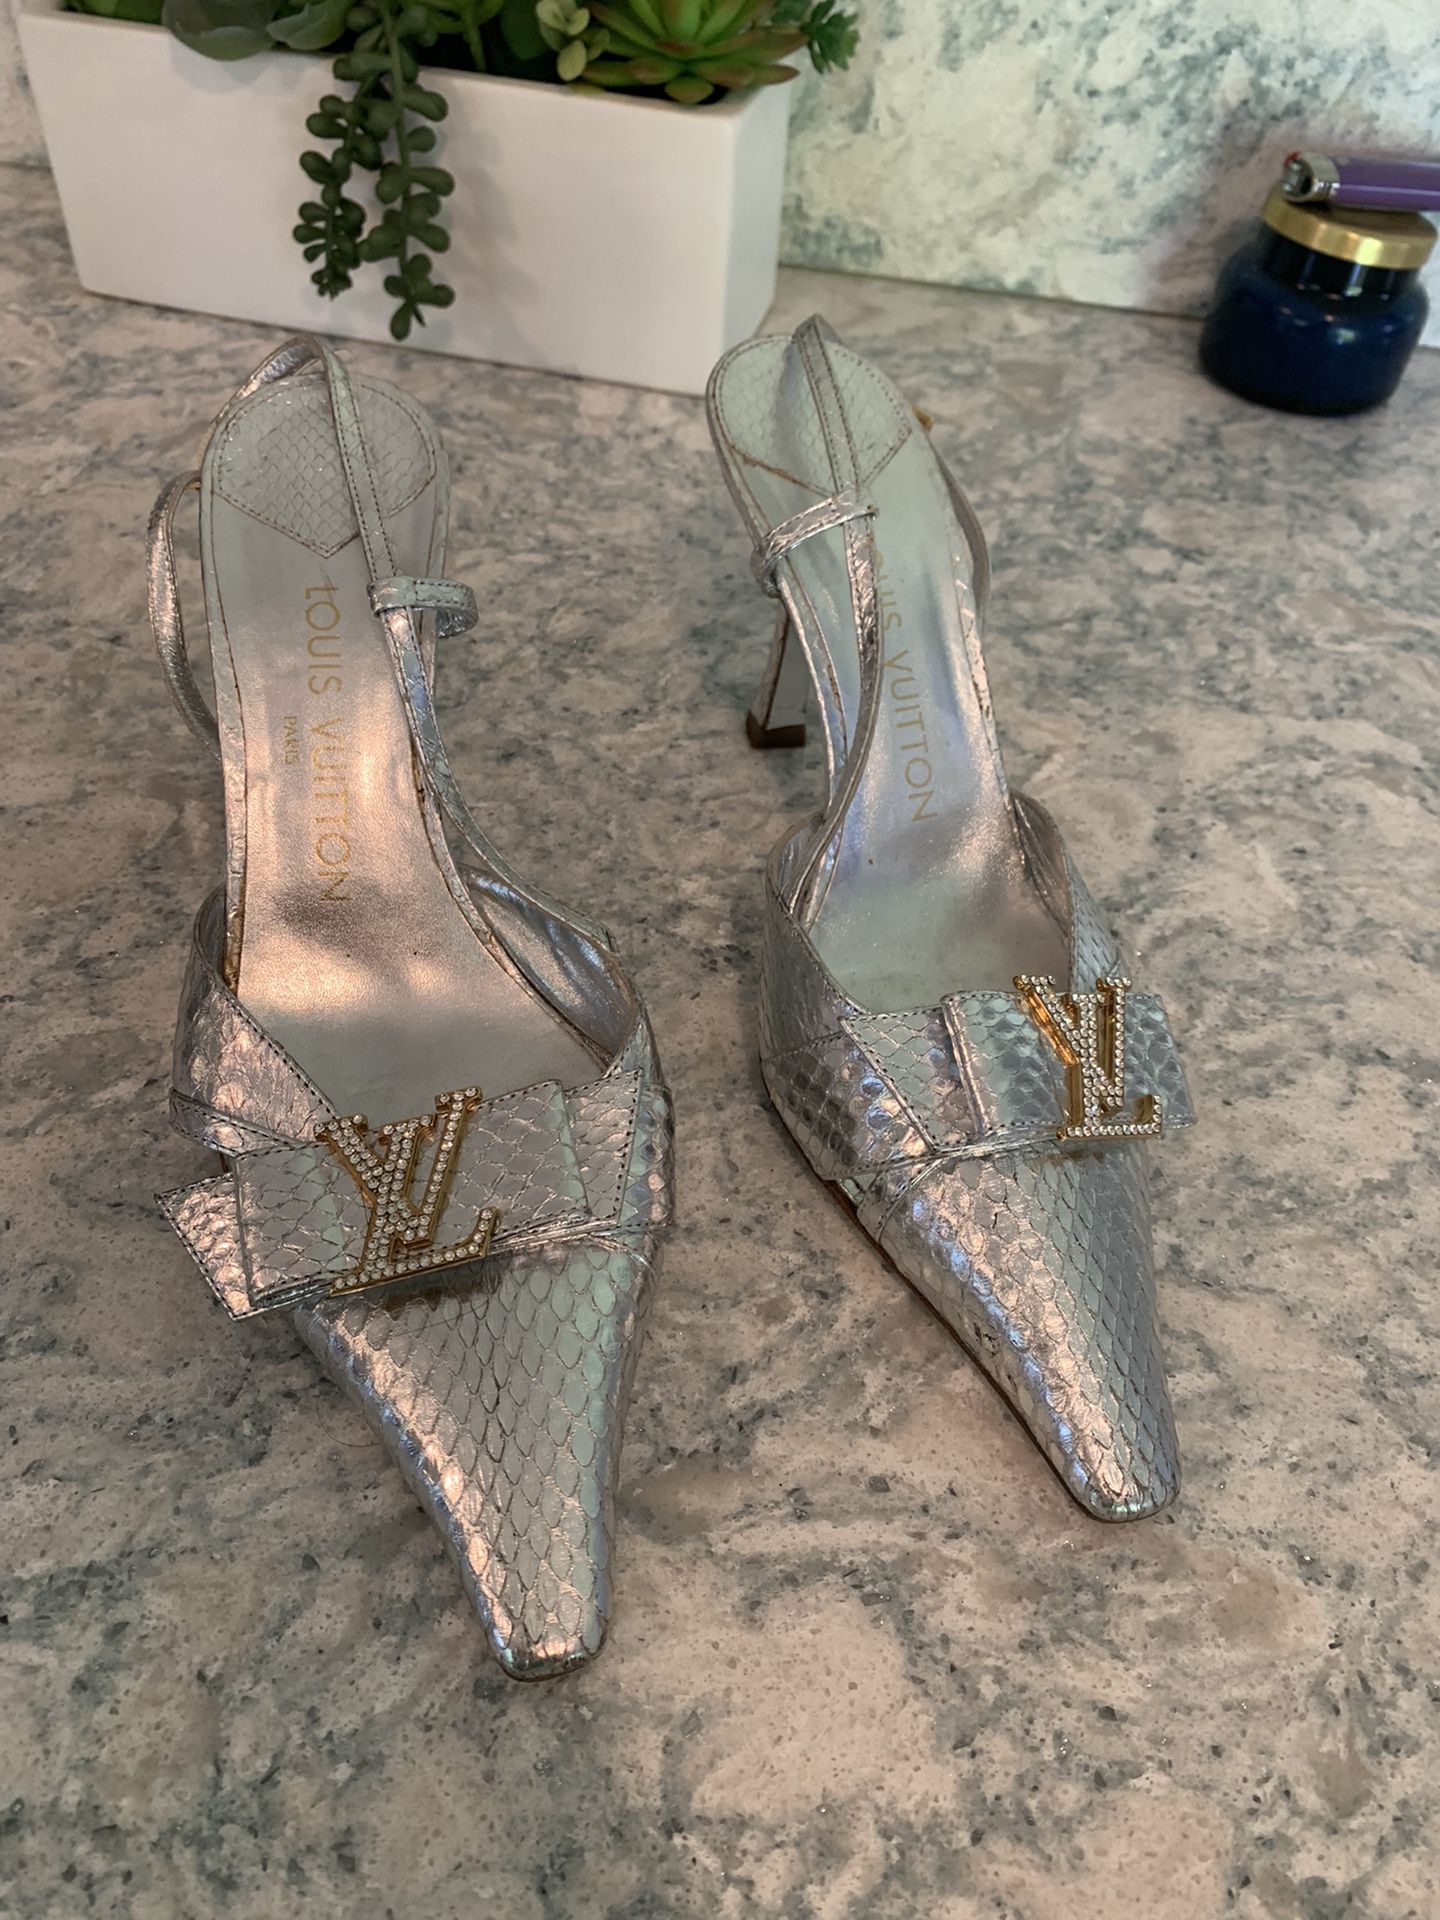 Louis Vuitton Shoes Size 36.5 for Sale in Miami, FL - OfferUp